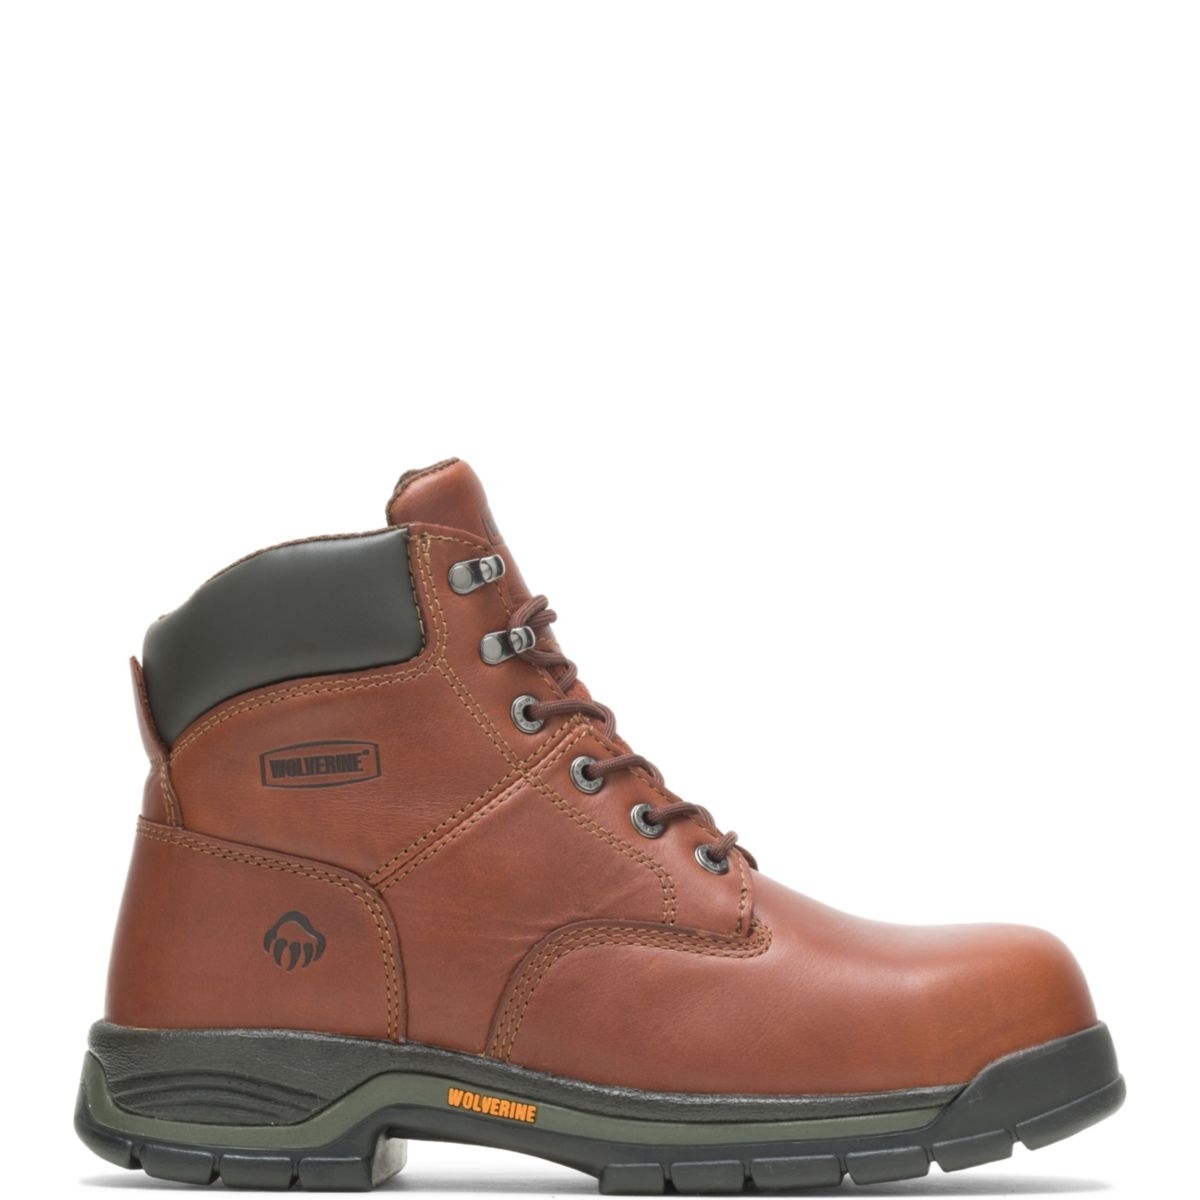 WOLVERINE Men's Harrison 6 Lace-Up SoftToe Work Boot Brown - W04906 Varies BROWN - BROWN, 15